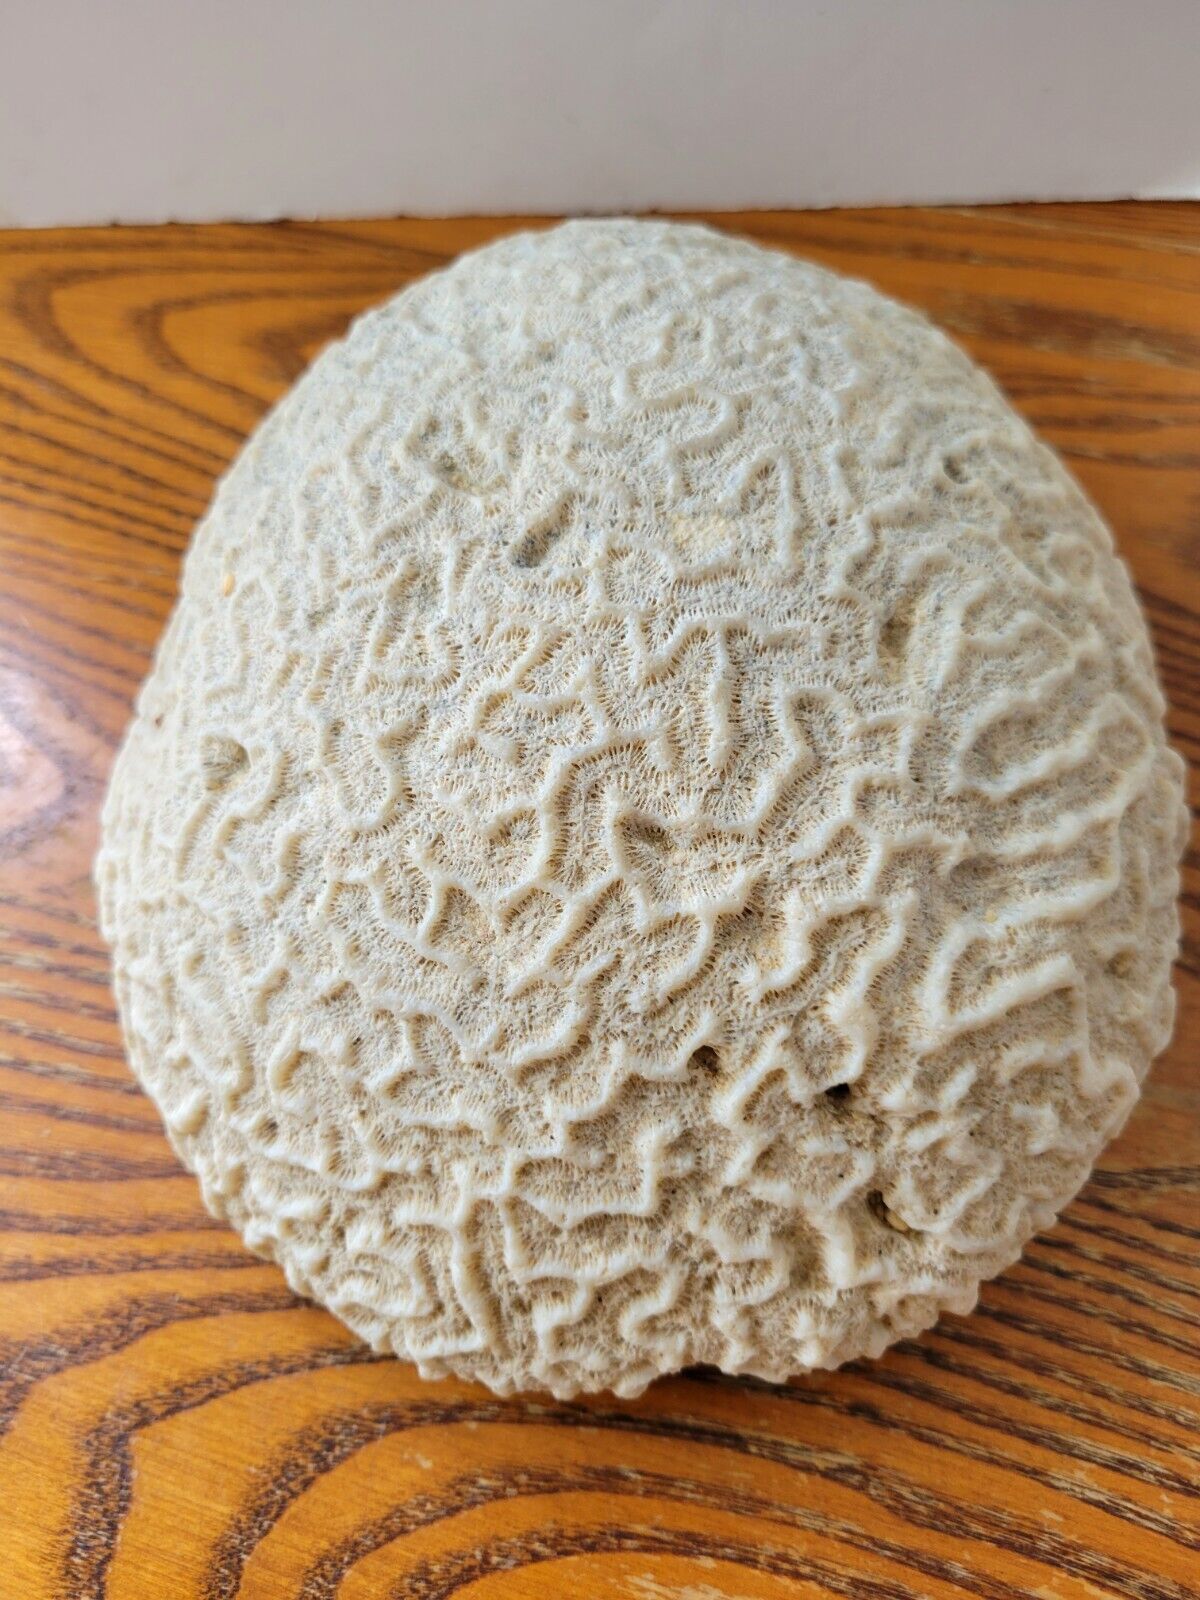 White brain coral from the tropical islands